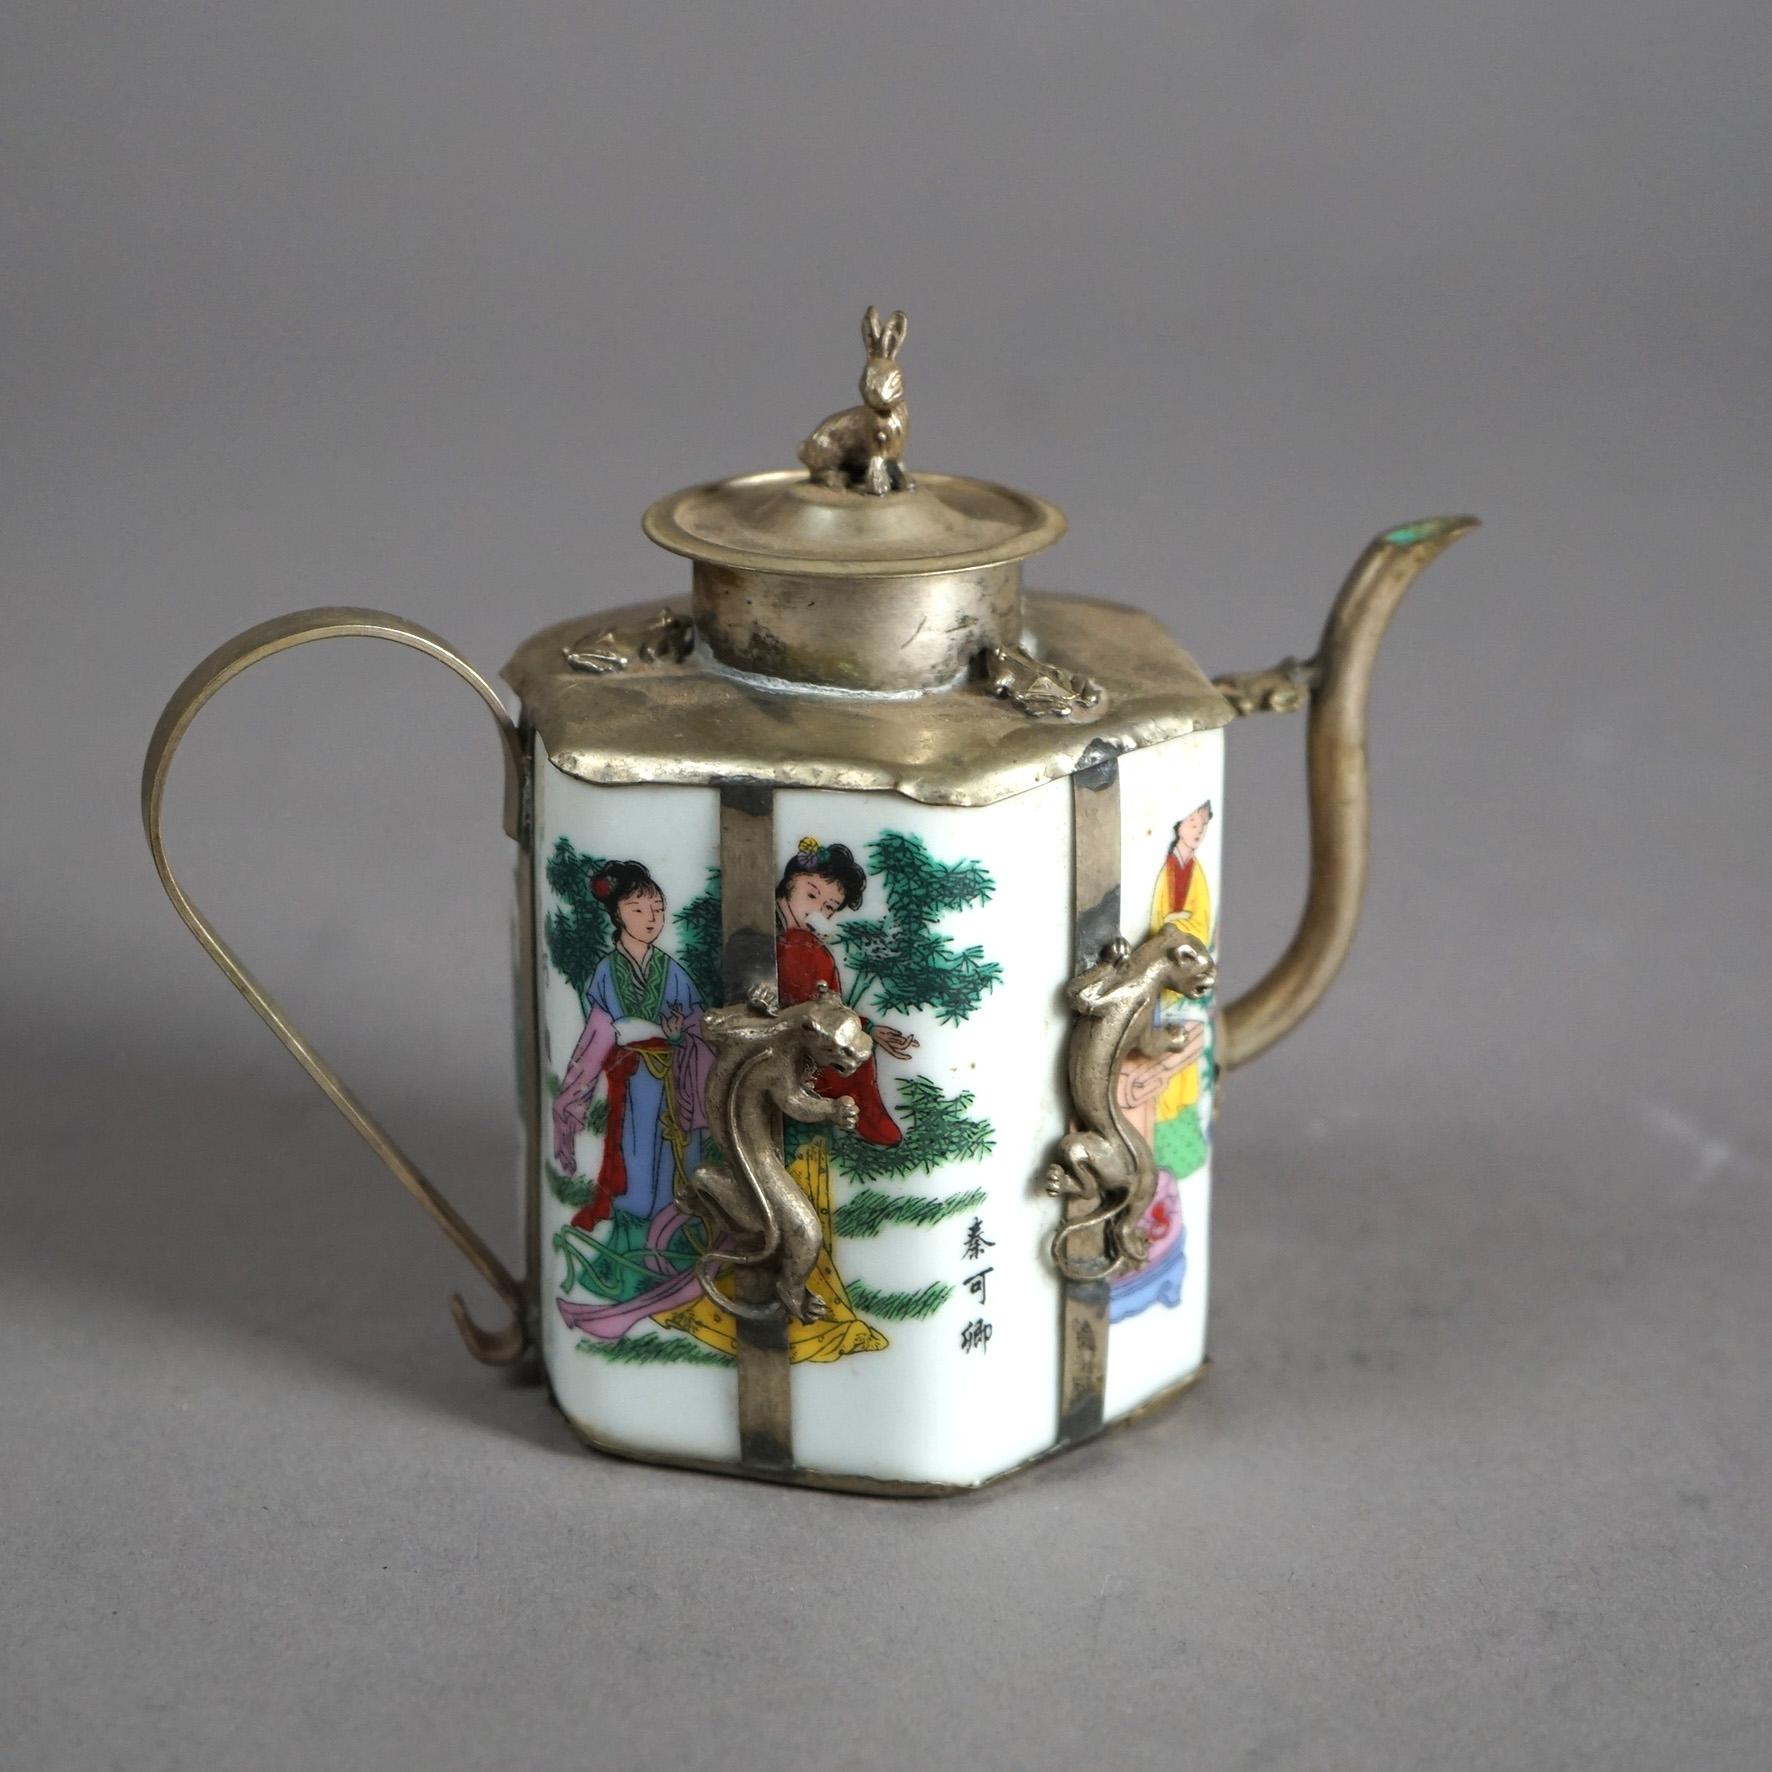 Chinese Miniature Porcelain Teapot with Silver Overlay 20thC In Good Condition For Sale In Big Flats, NY